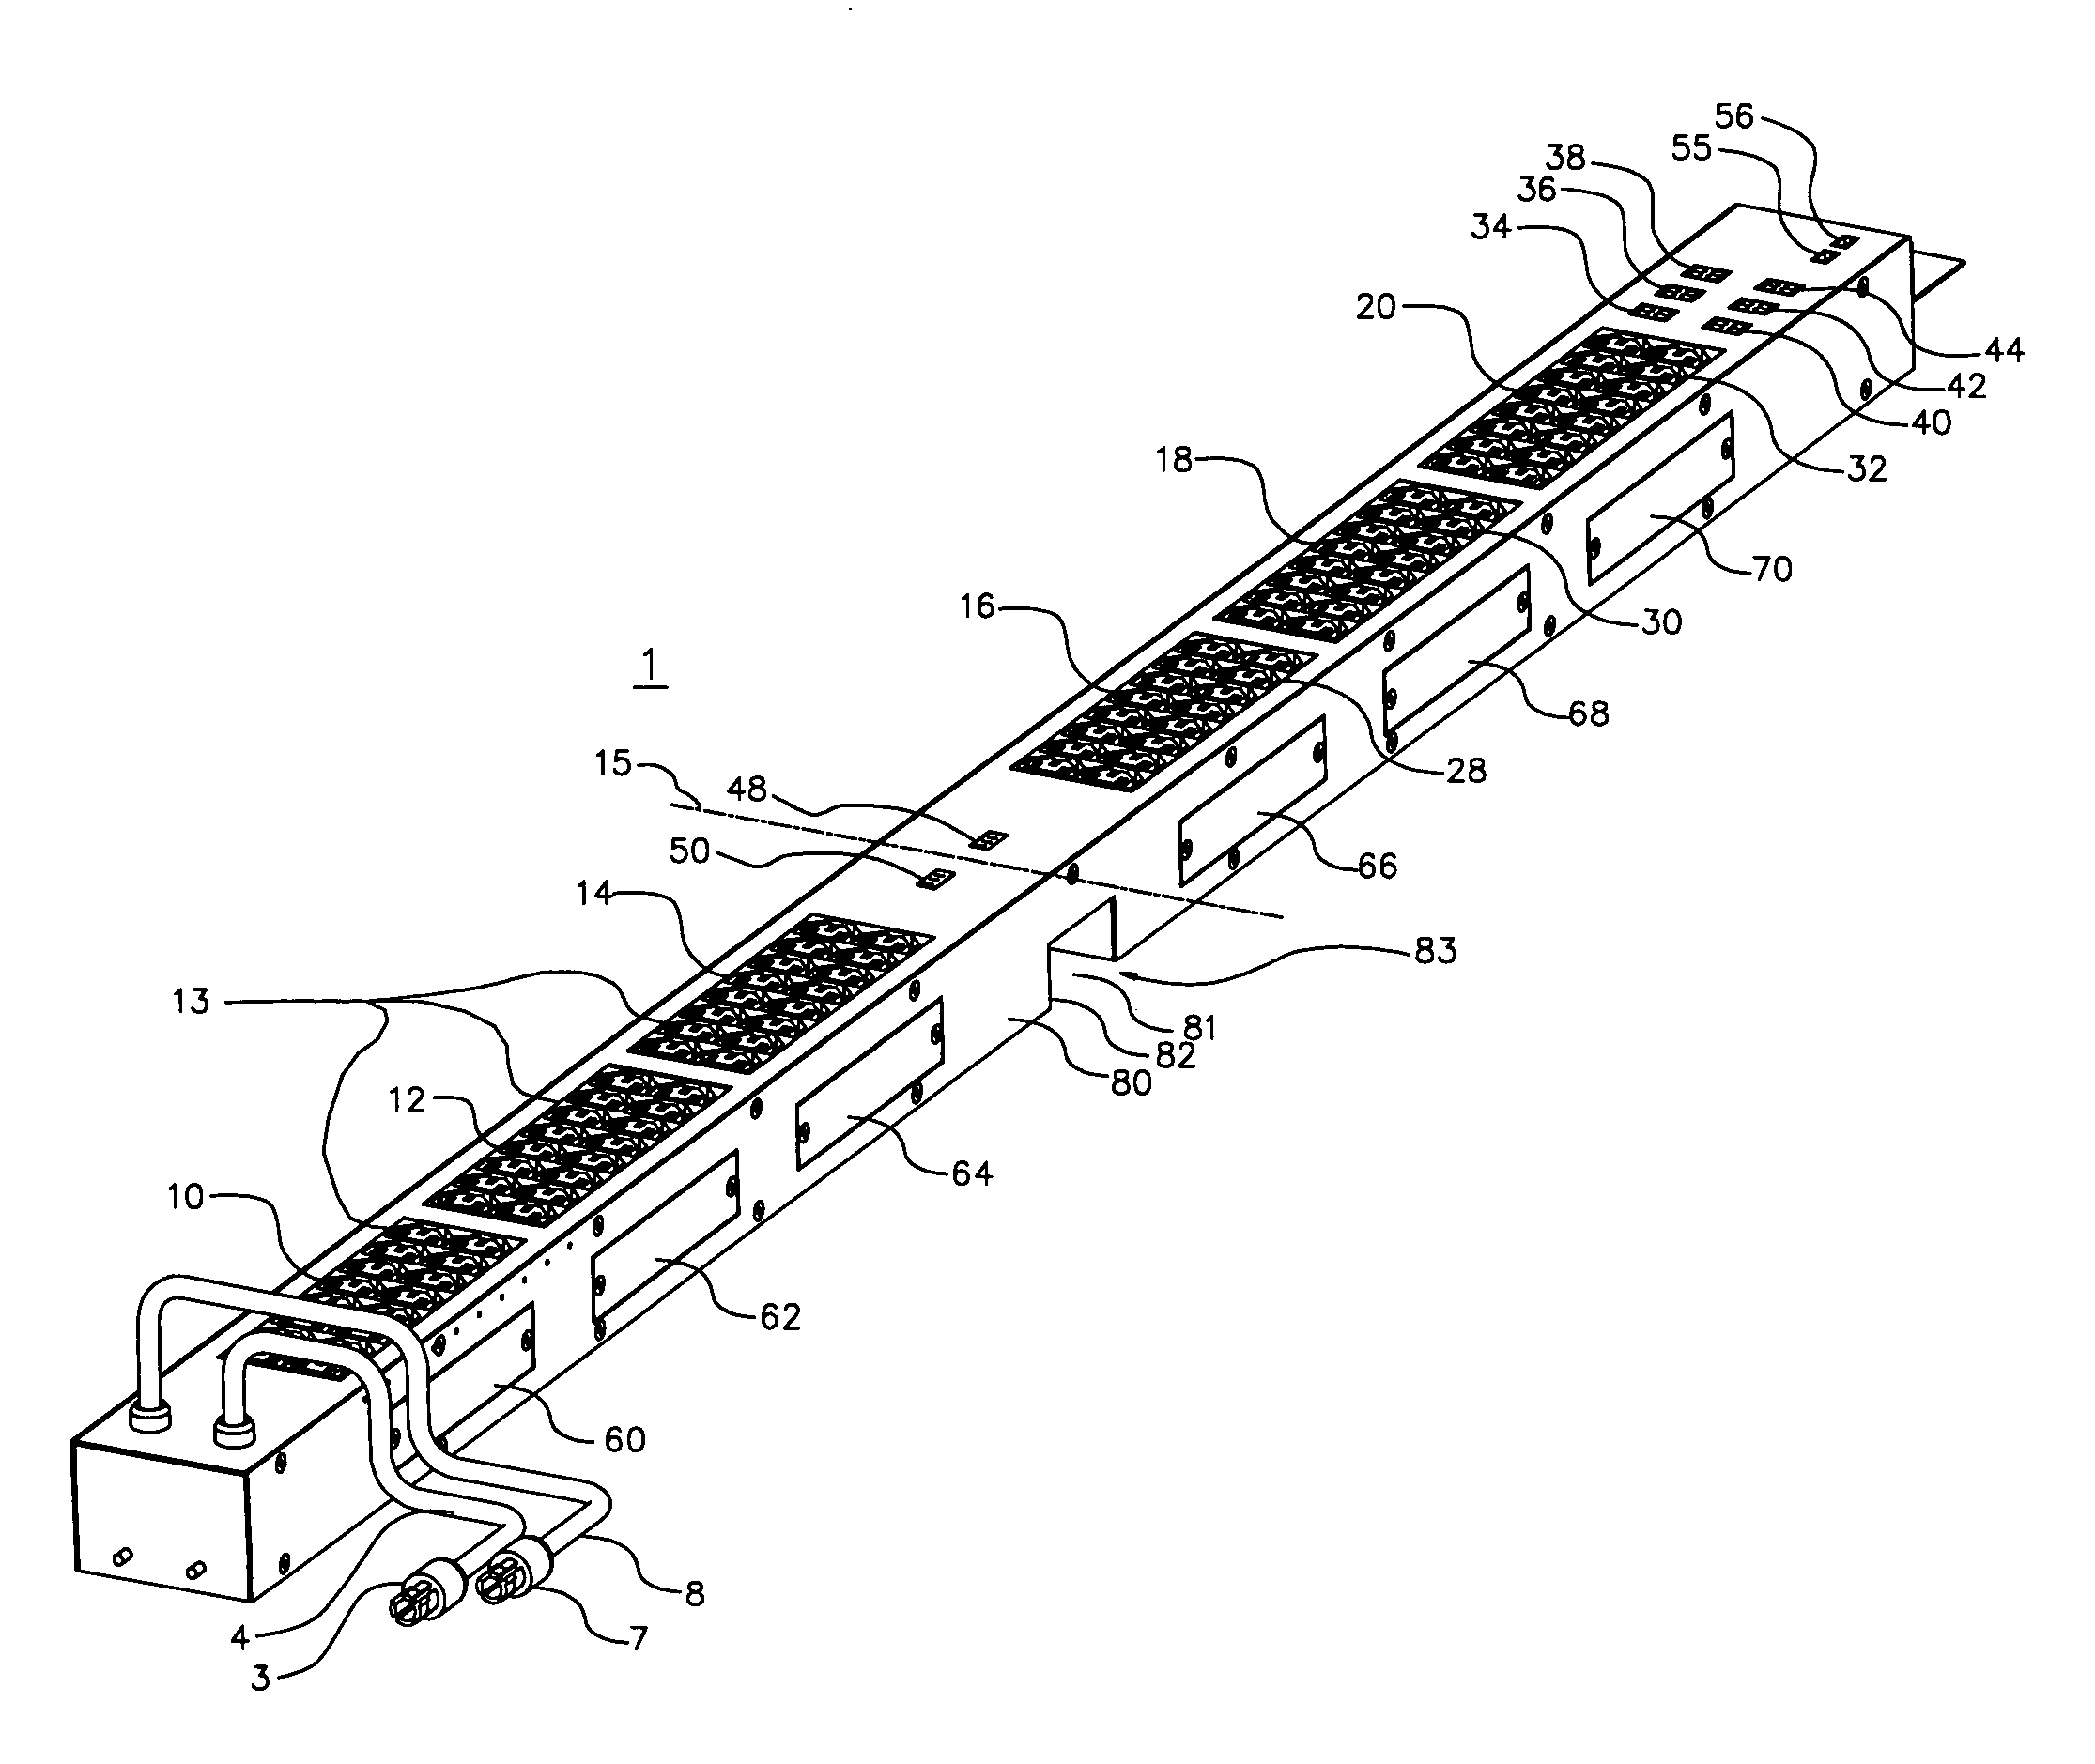 Electrical circuit apparatus with fuse access section